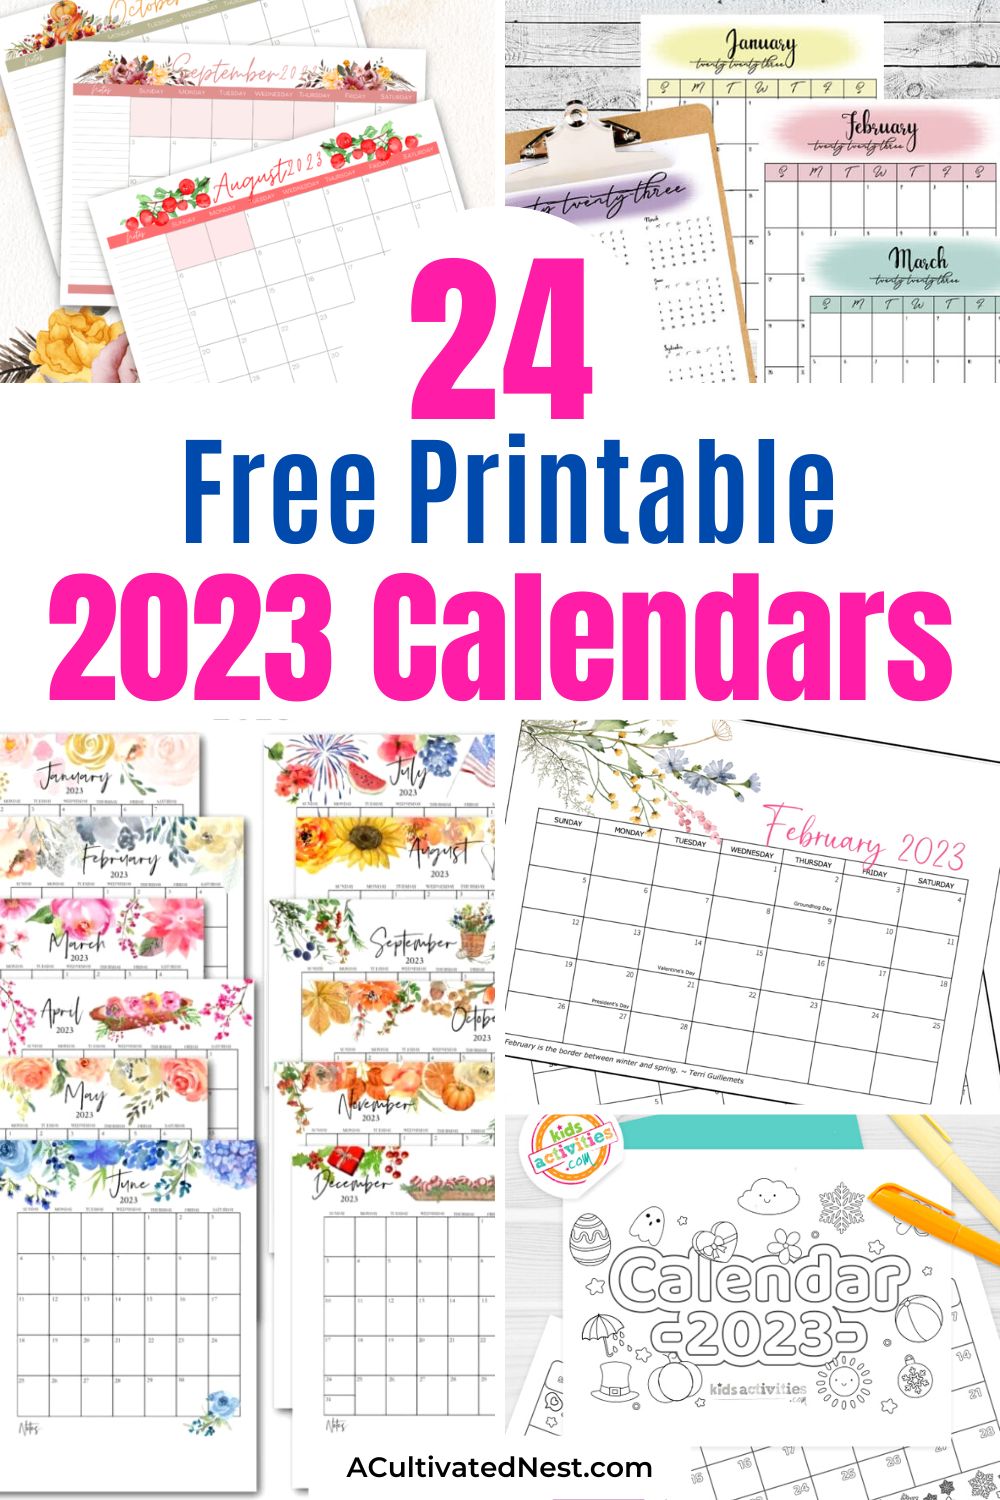 24 Free Printable 2023 Calendars- If you're excited for the new year, then you should print out a new calendar to record all your plans and dreams! These free printable 2023 calendars have plenty of space for everything you hope to do in 2023! | free calendar printable, wall calendar printables, desk calendar printables, #freePrintable #printables #calendars #2023Calendars #ACultivatedNest